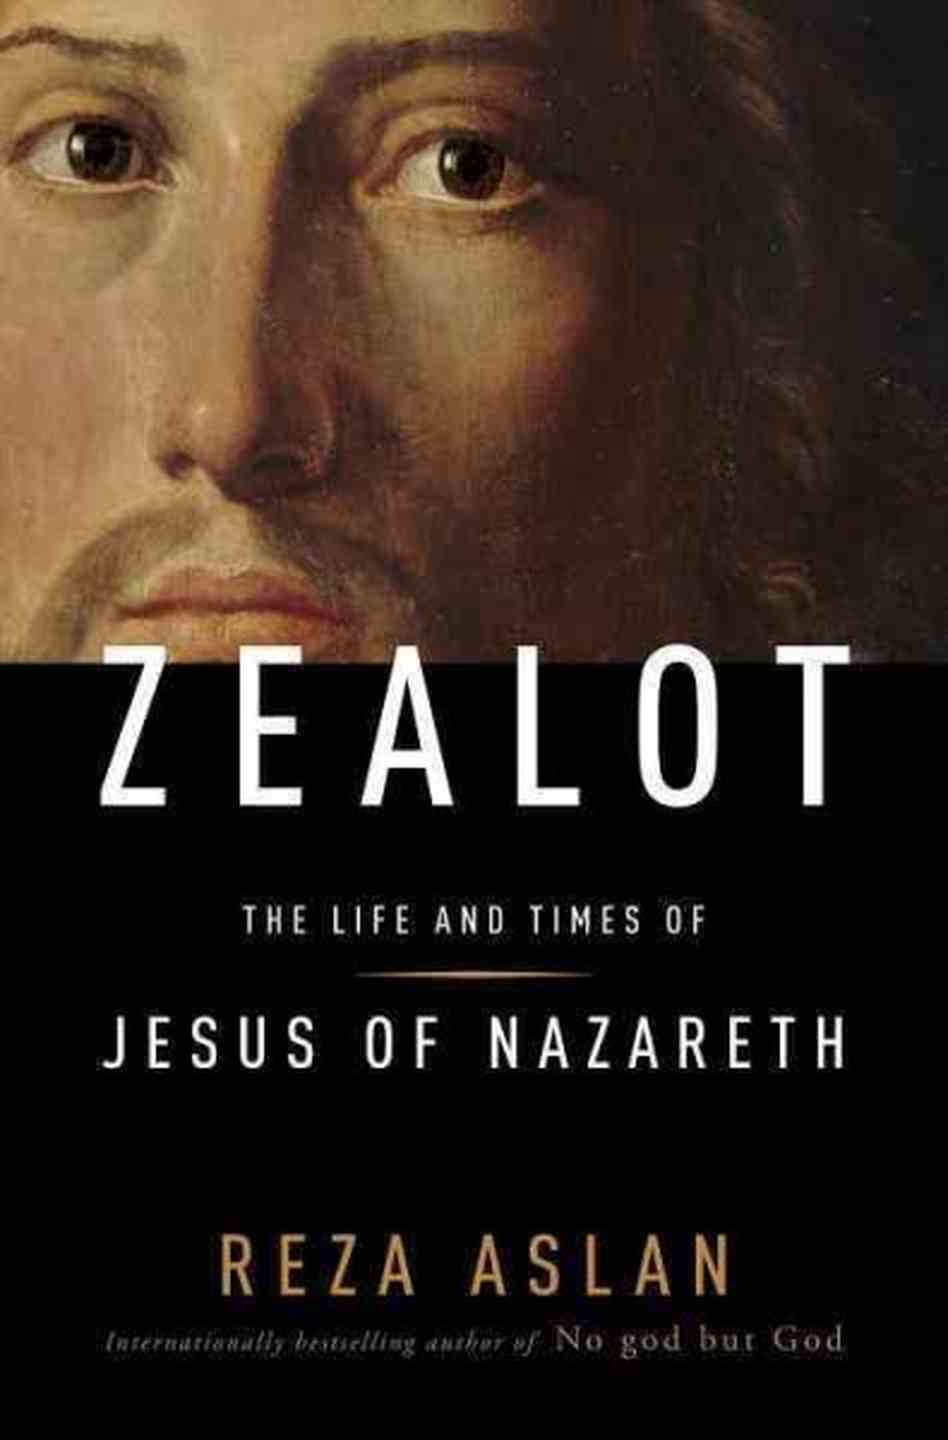 the zealot book review